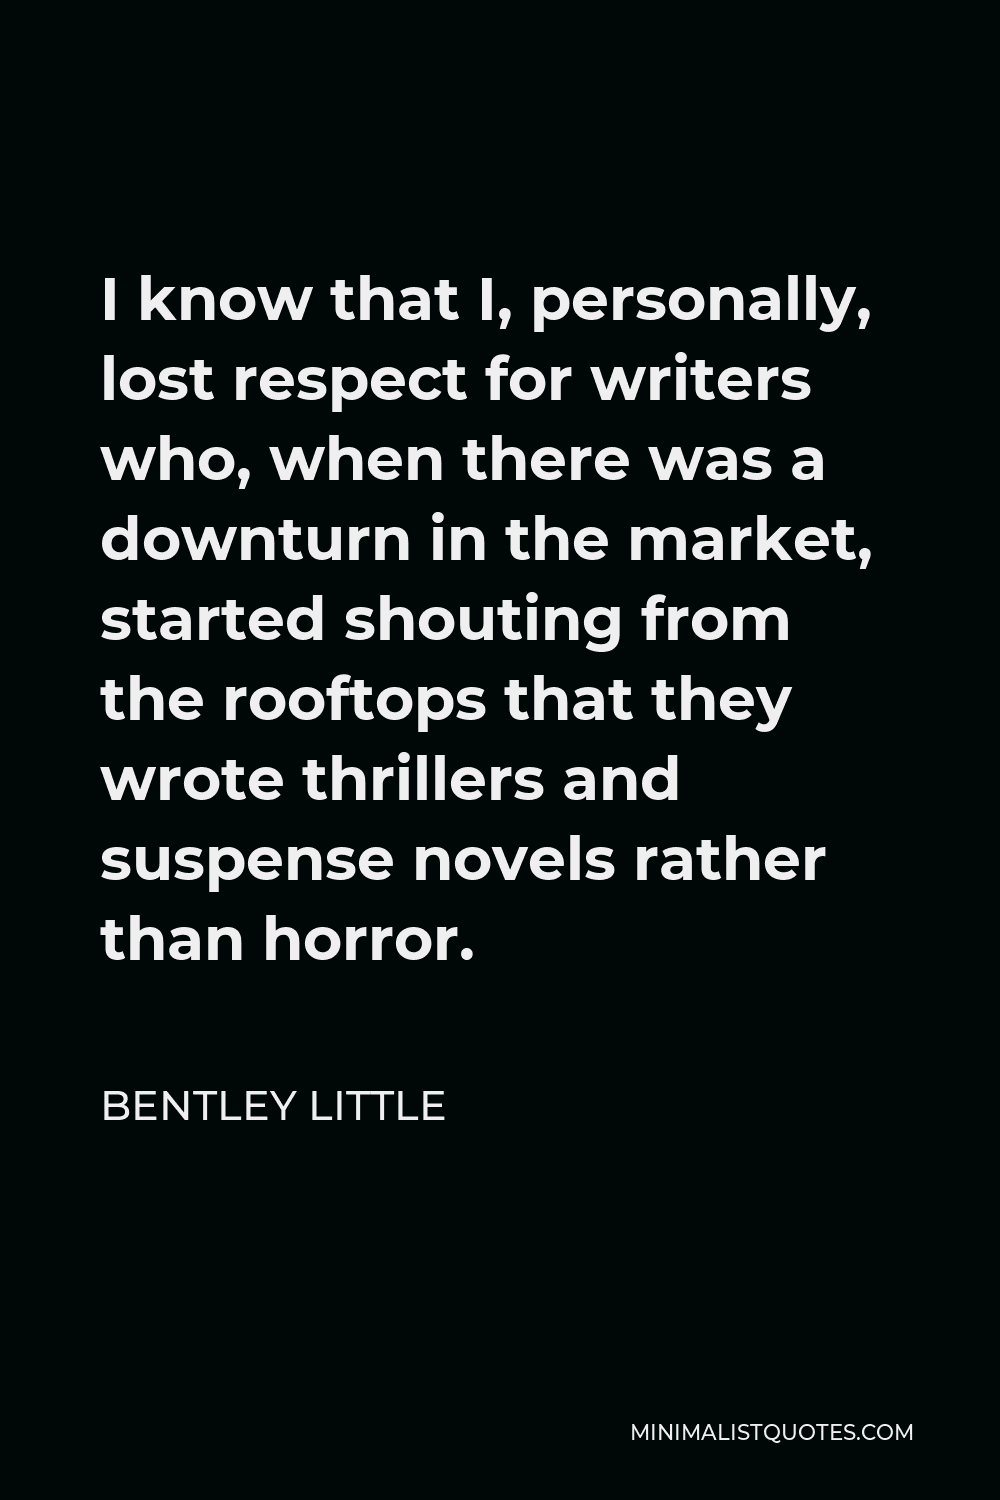 Bentley Little Quote - I know that I, personally, lost respect for writers who, when there was a downturn in the market, started shouting from the rooftops that they wrote thrillers and suspense novels rather than horror.